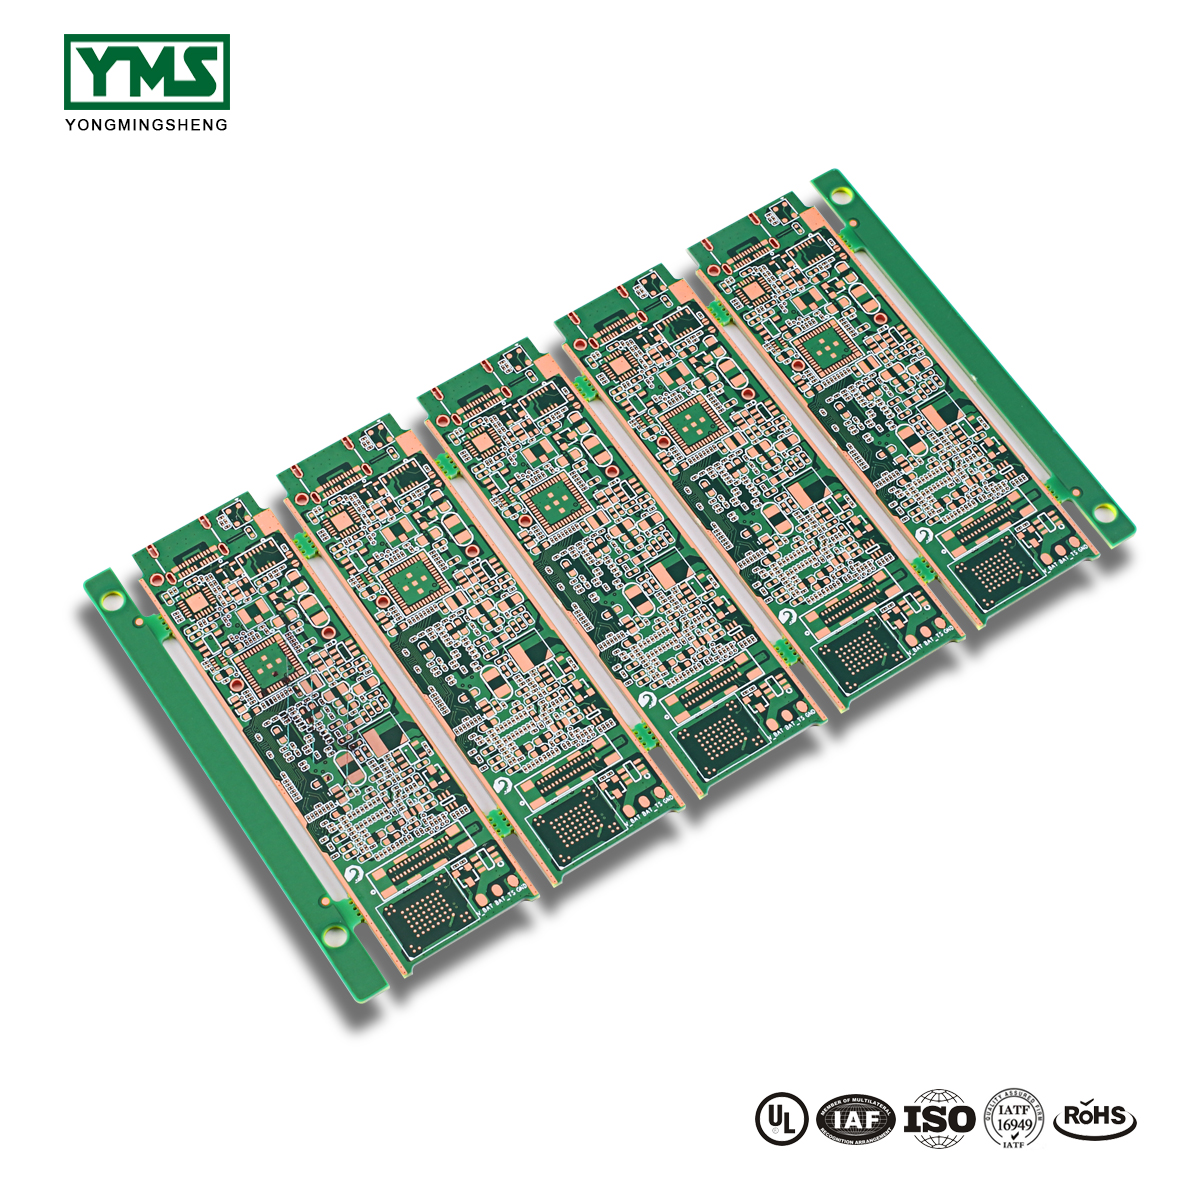 Reasonable price for Metal Core Pcb For Led - 12 Layer 2 Step HDI Board | YMS PCB – Yongmingsheng